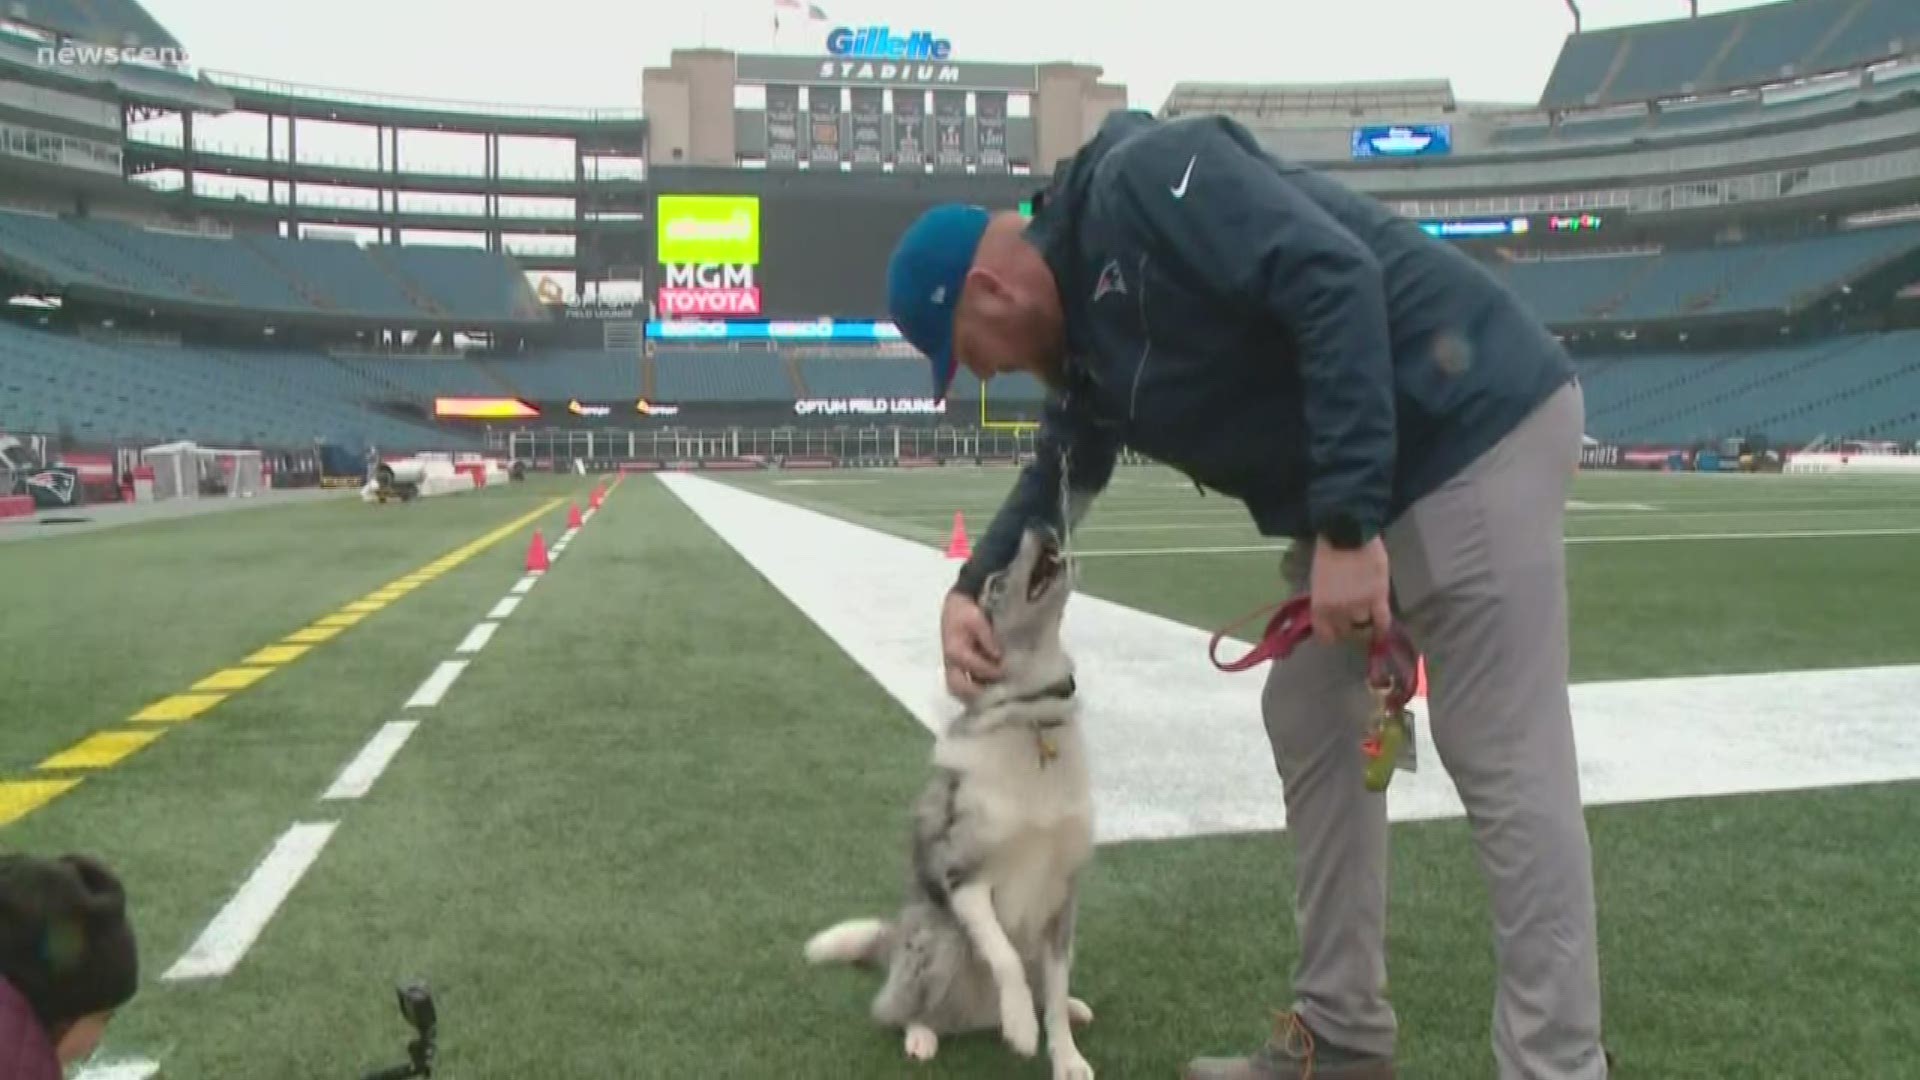 Mainer and his dog tend to the turf at Gillette Stadium.